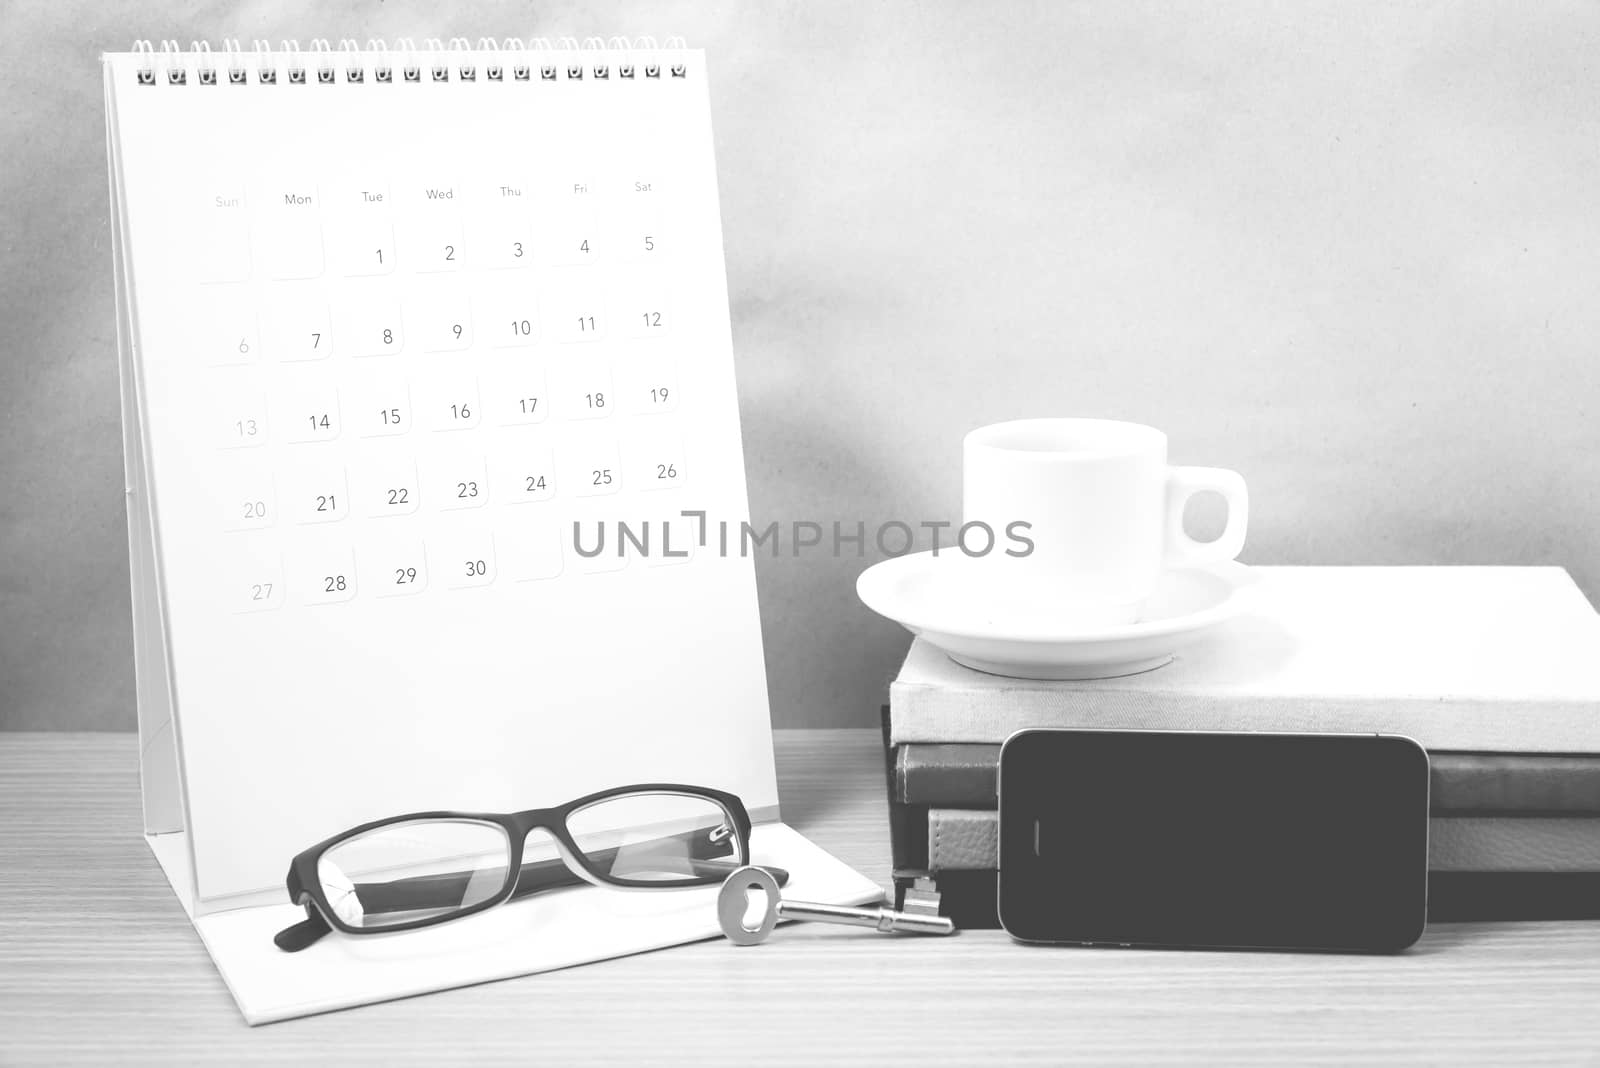 coffee and phone with key,eyeglasses,stack of book,calendar blac by ammza12